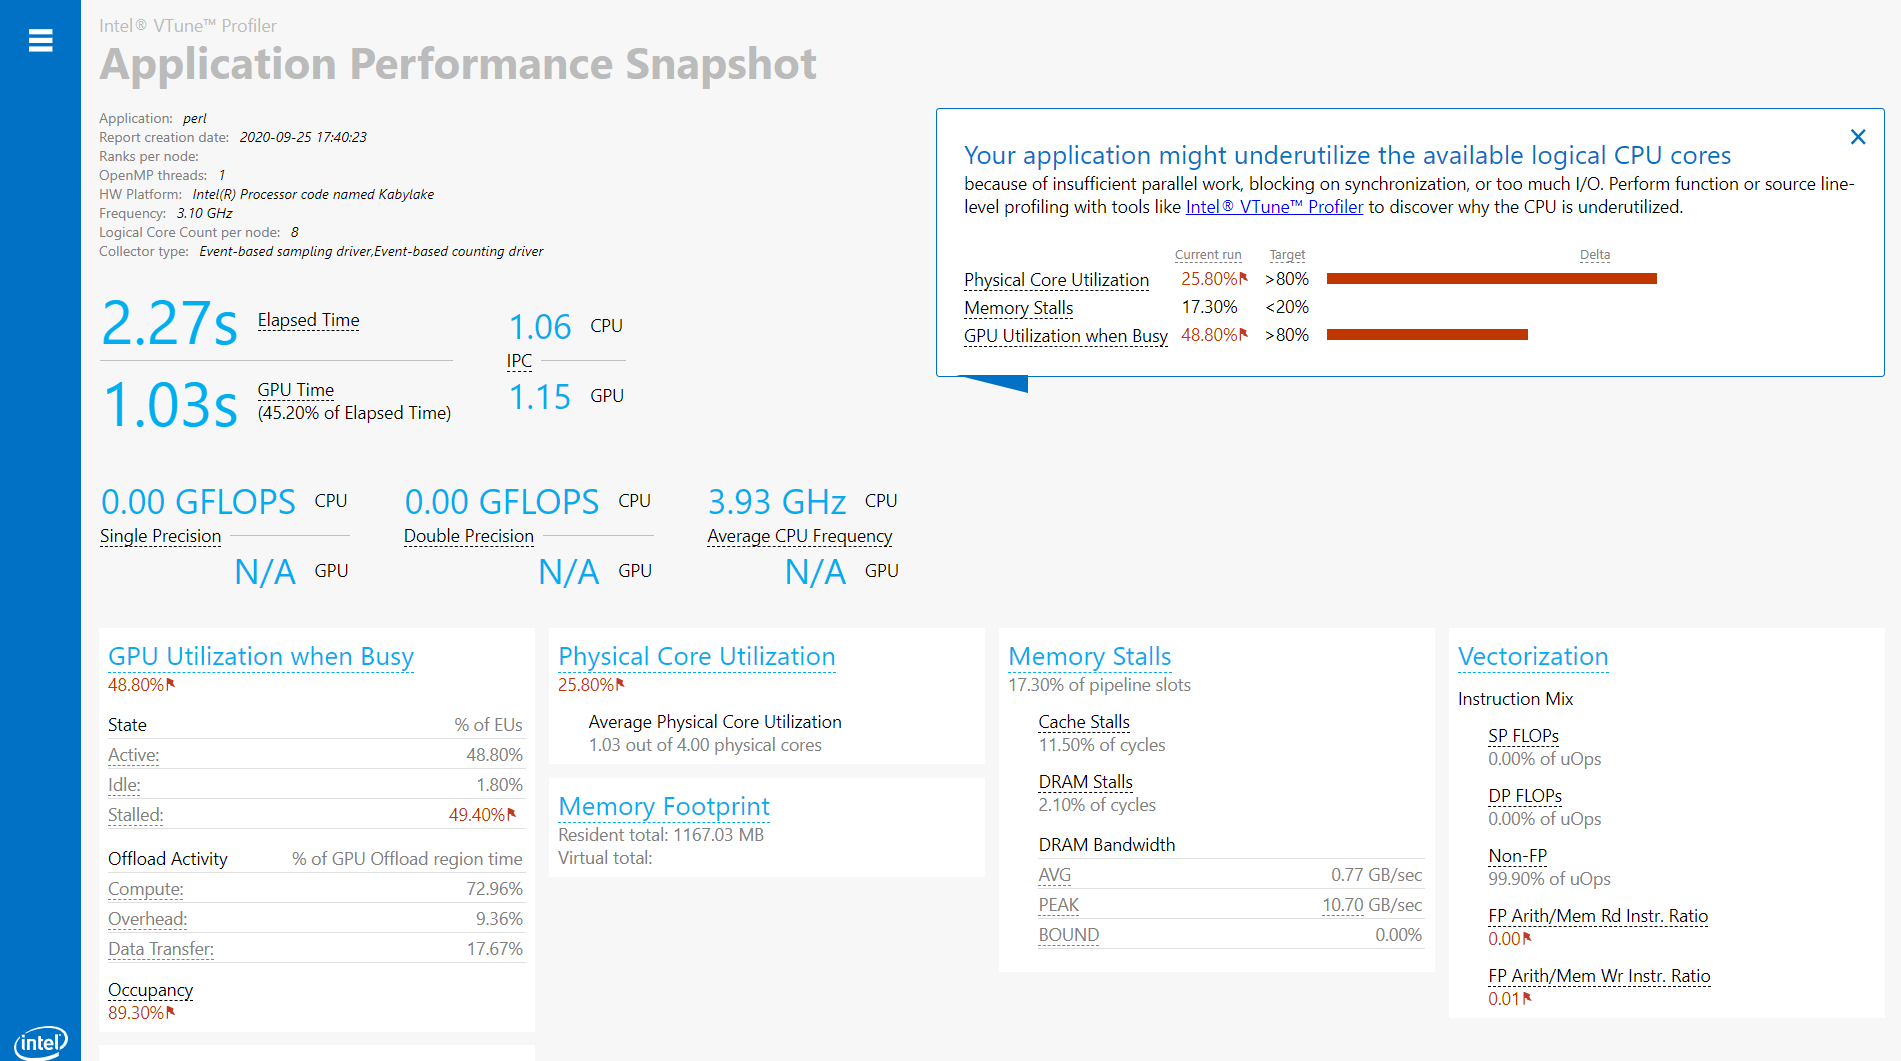 Summary of results from Application Performance Snapshot (Linux only)